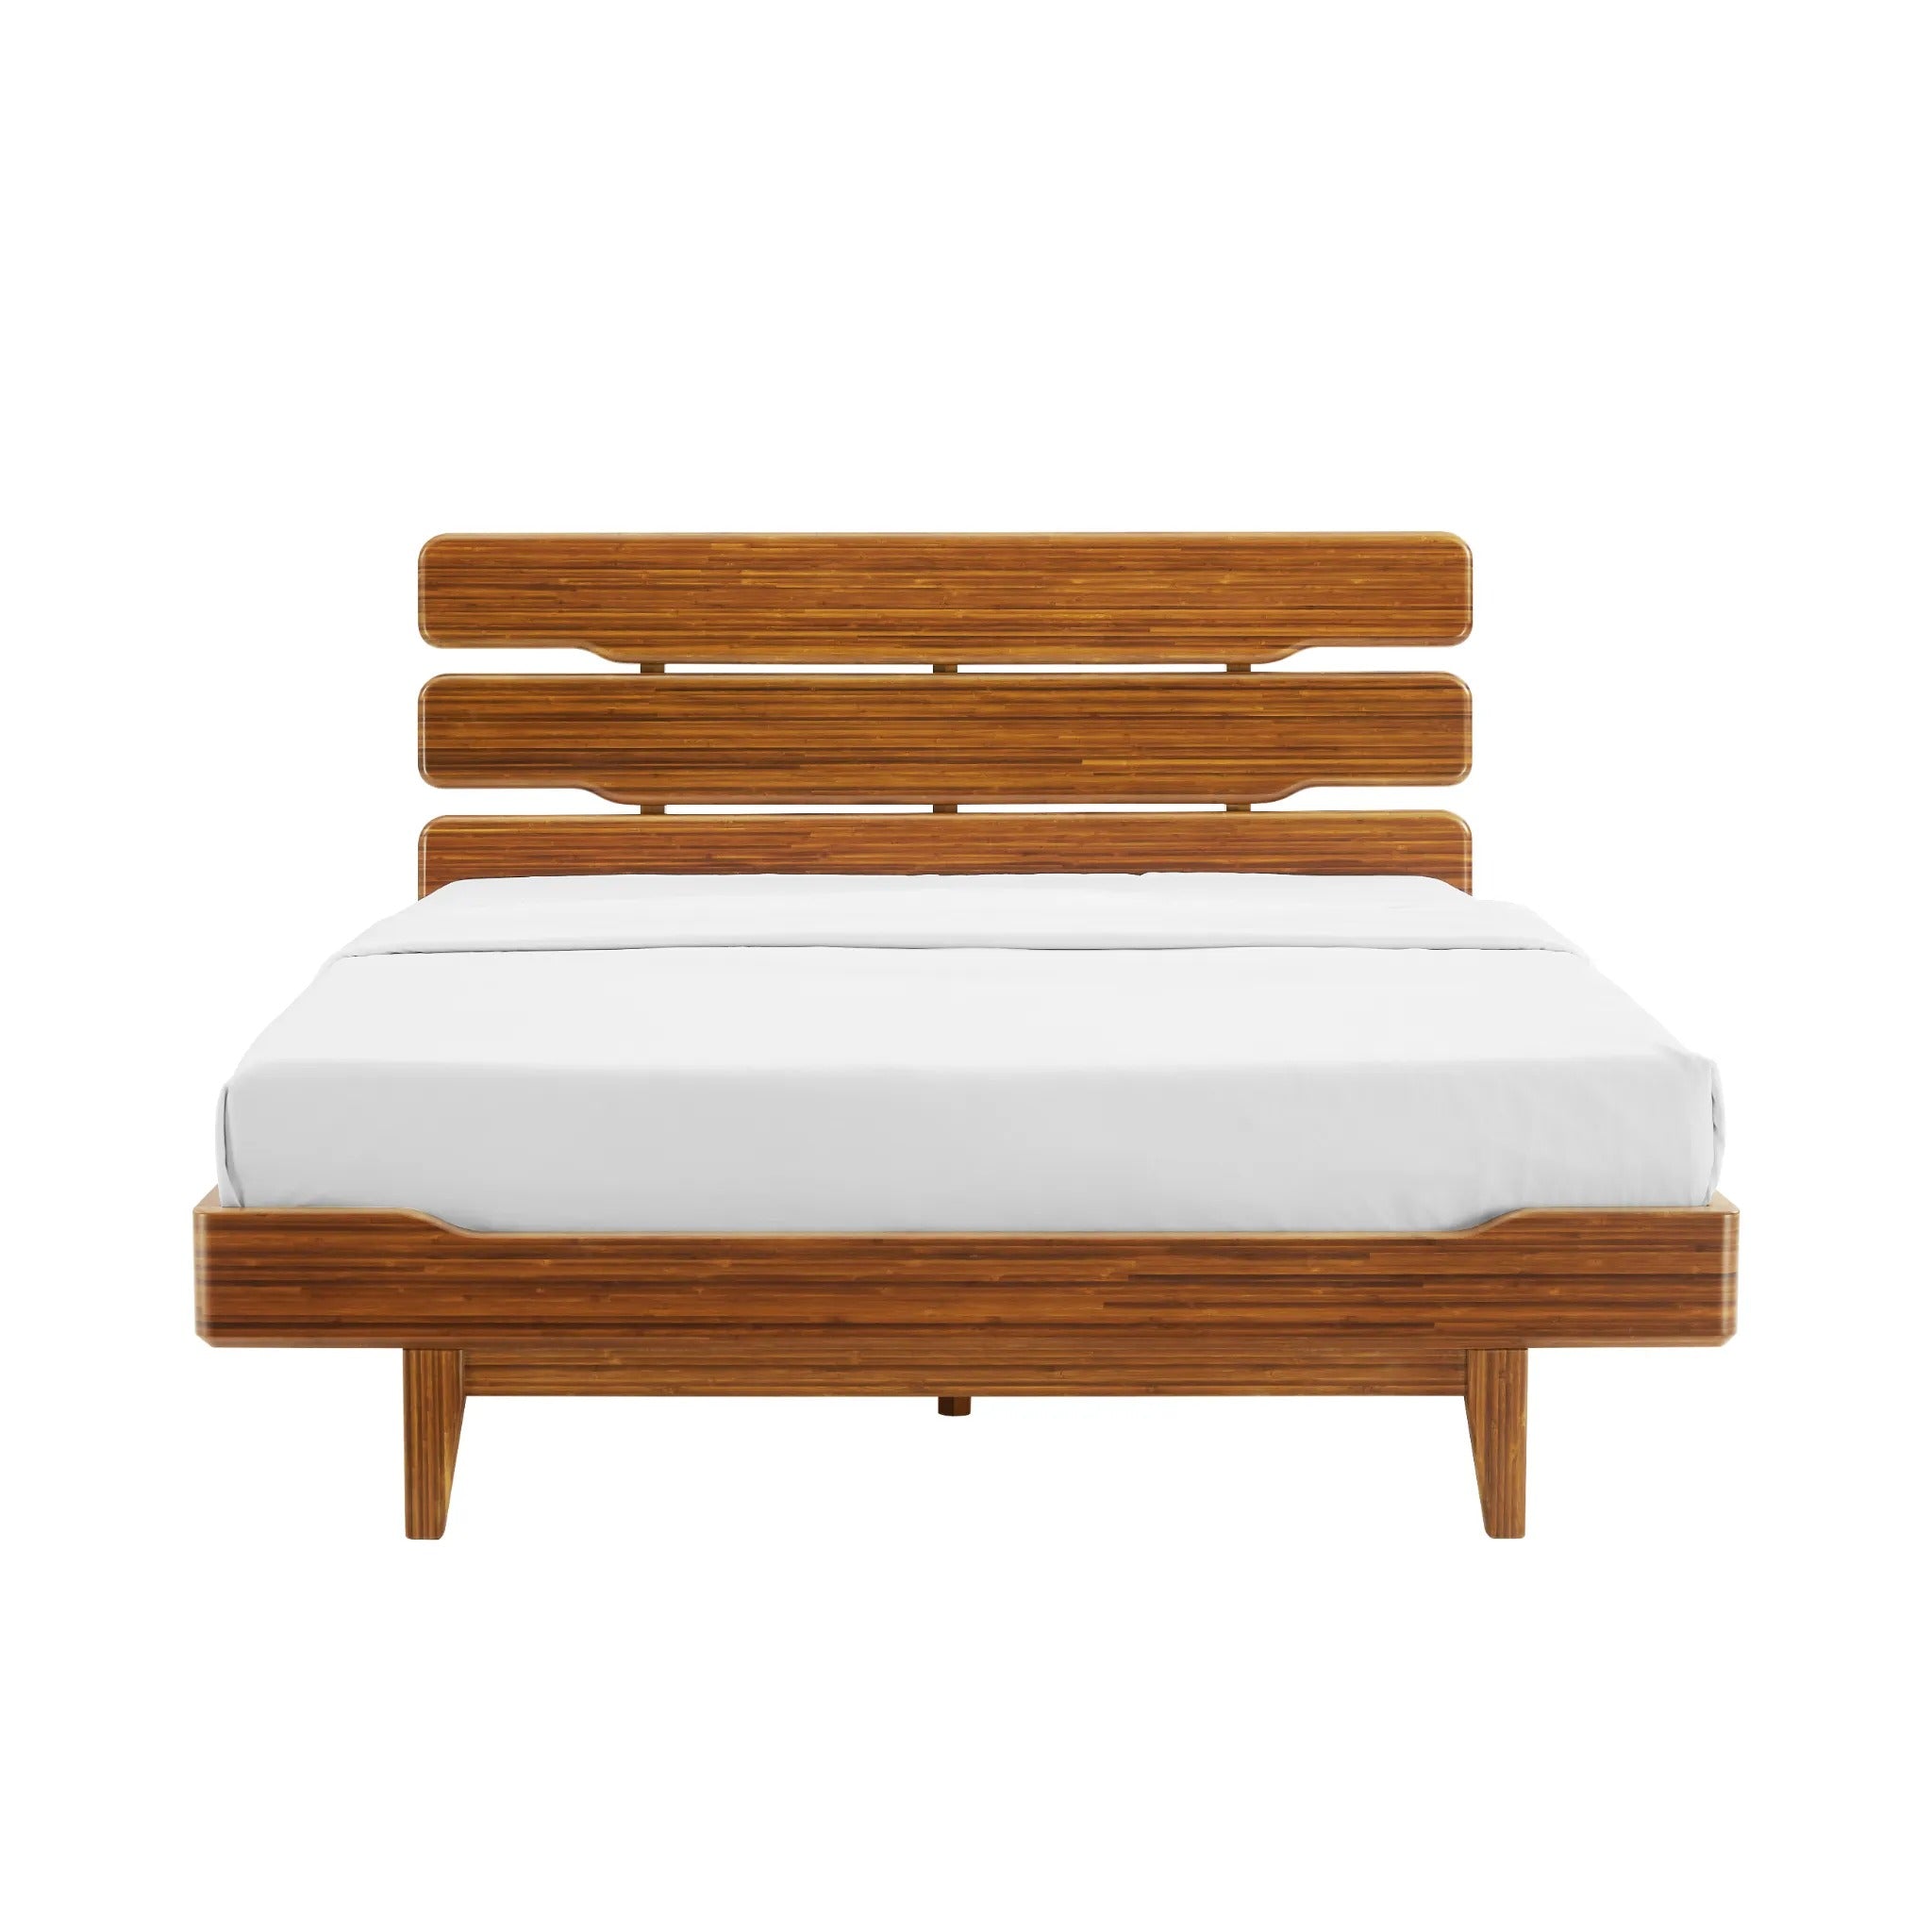 Currant Bamboo Bedframe